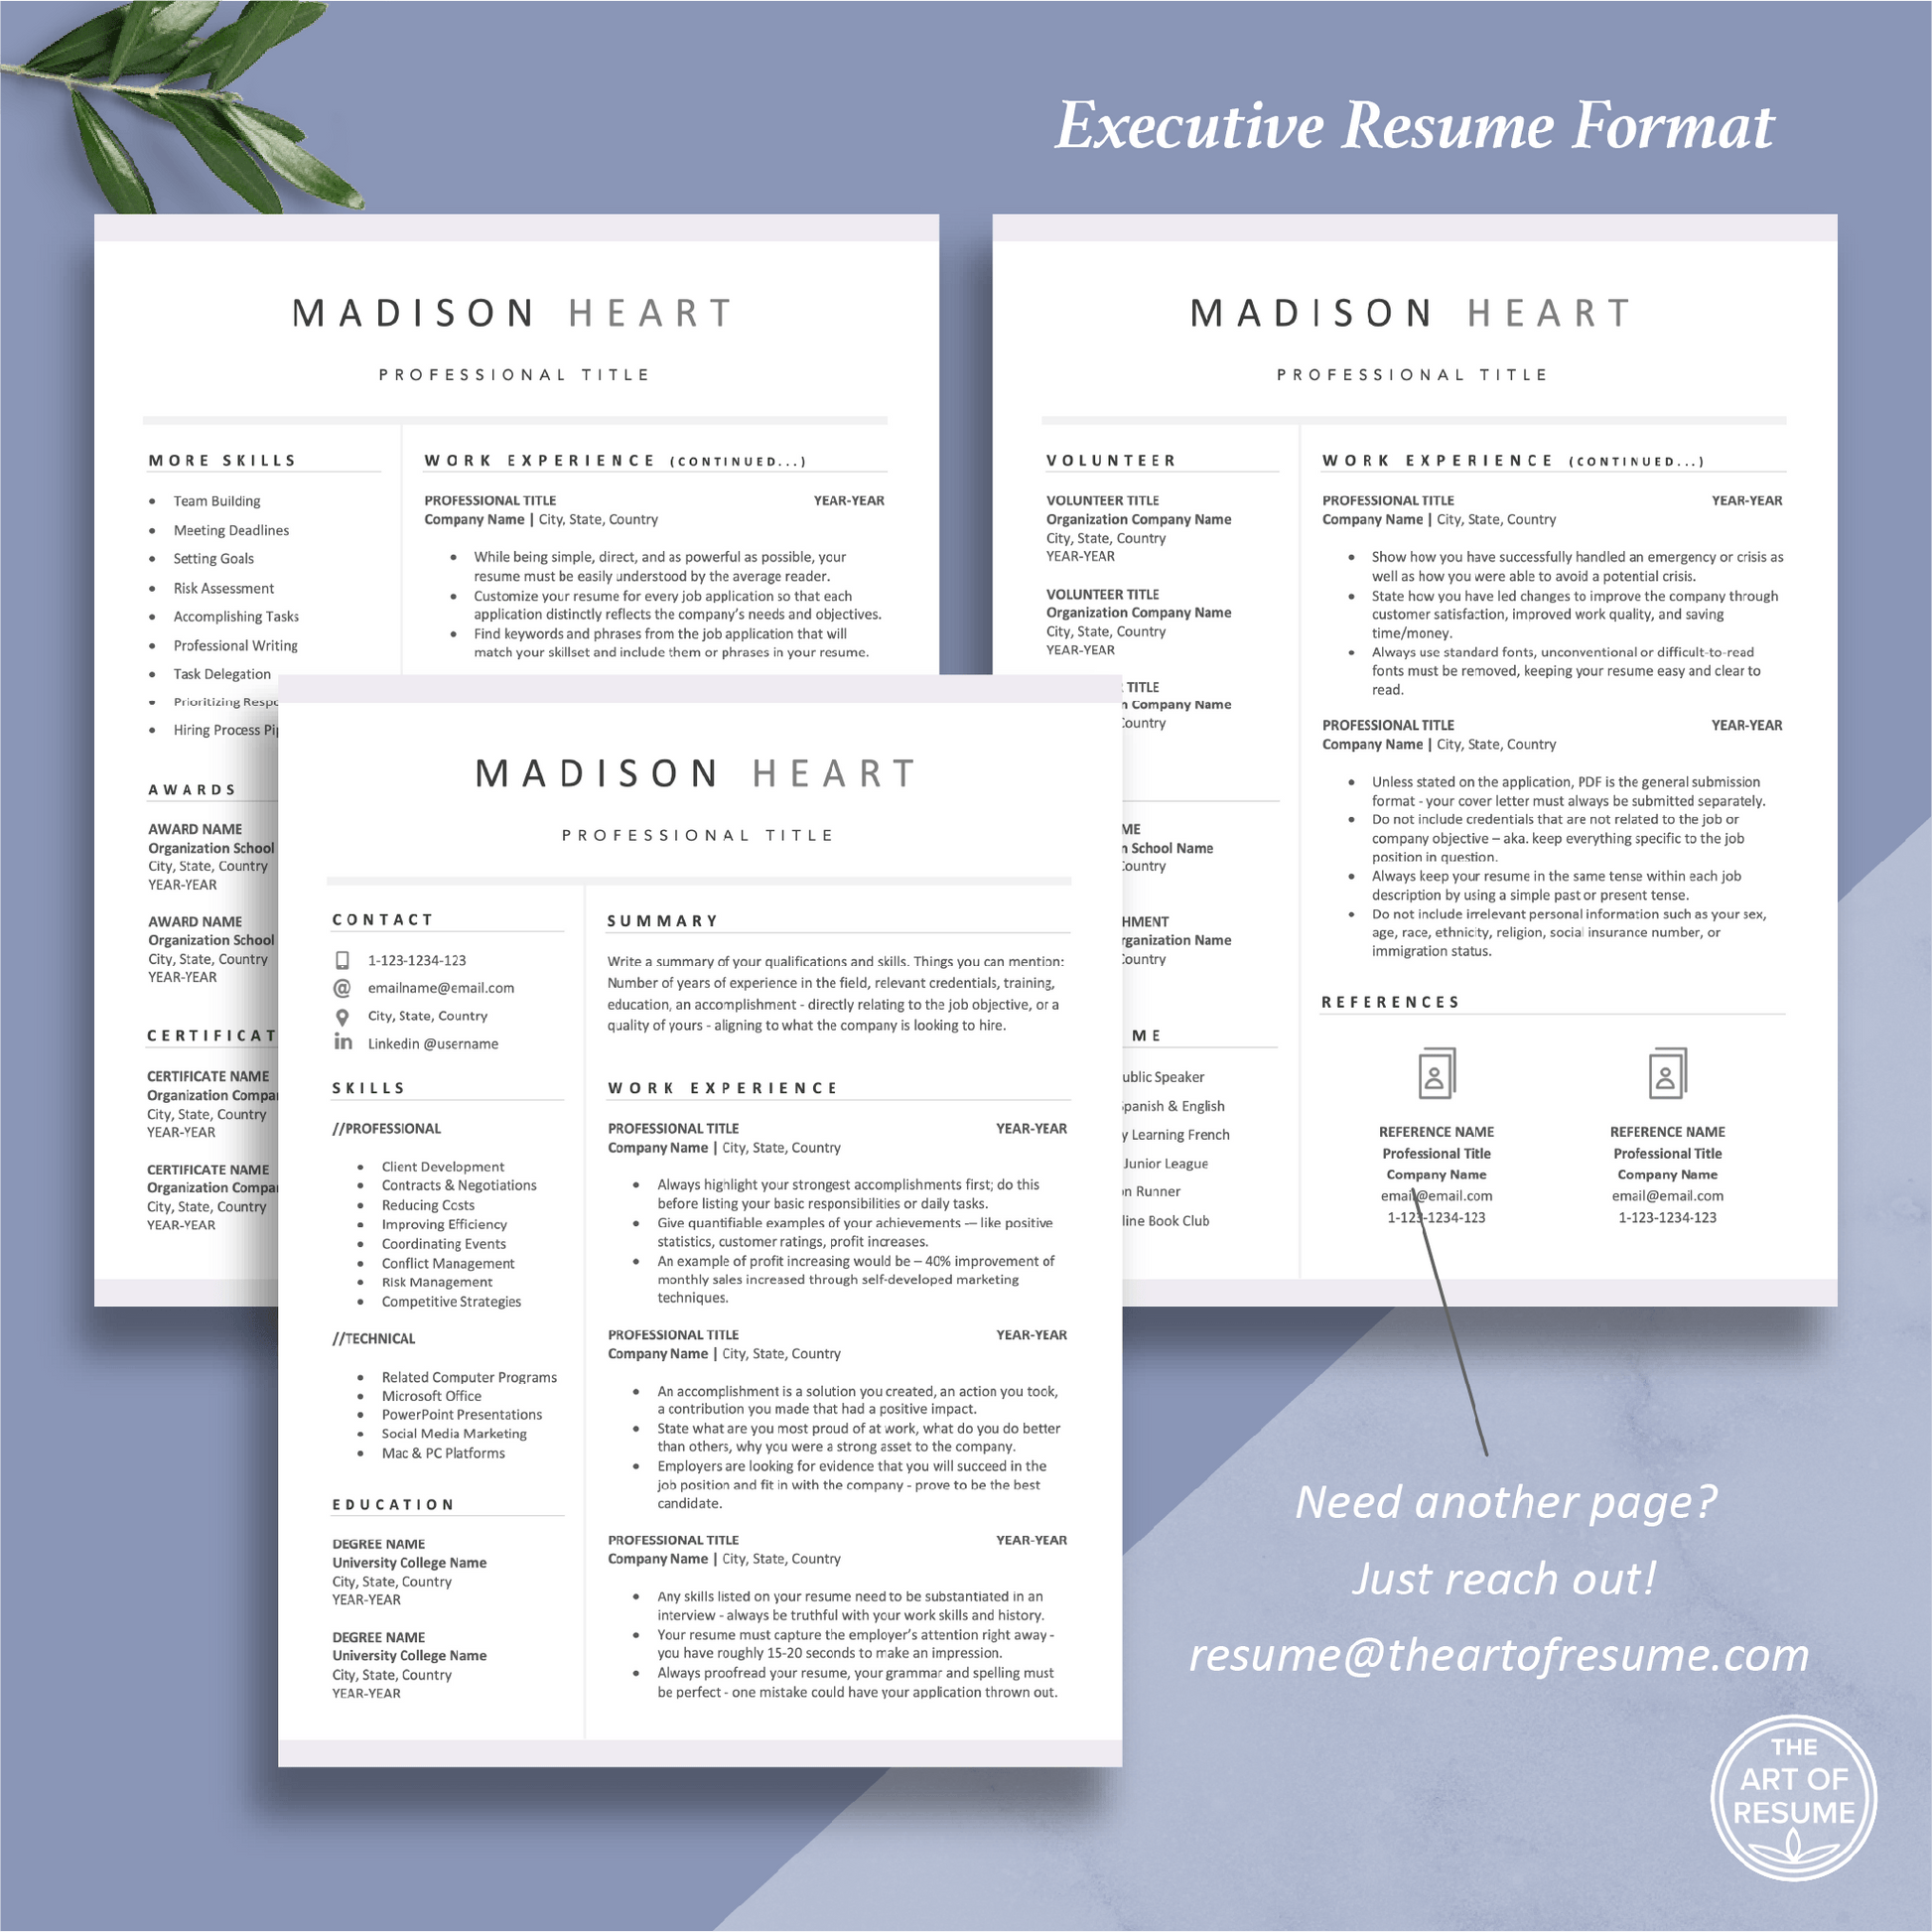 The Art of Resume | 3-Page Resume Template Format